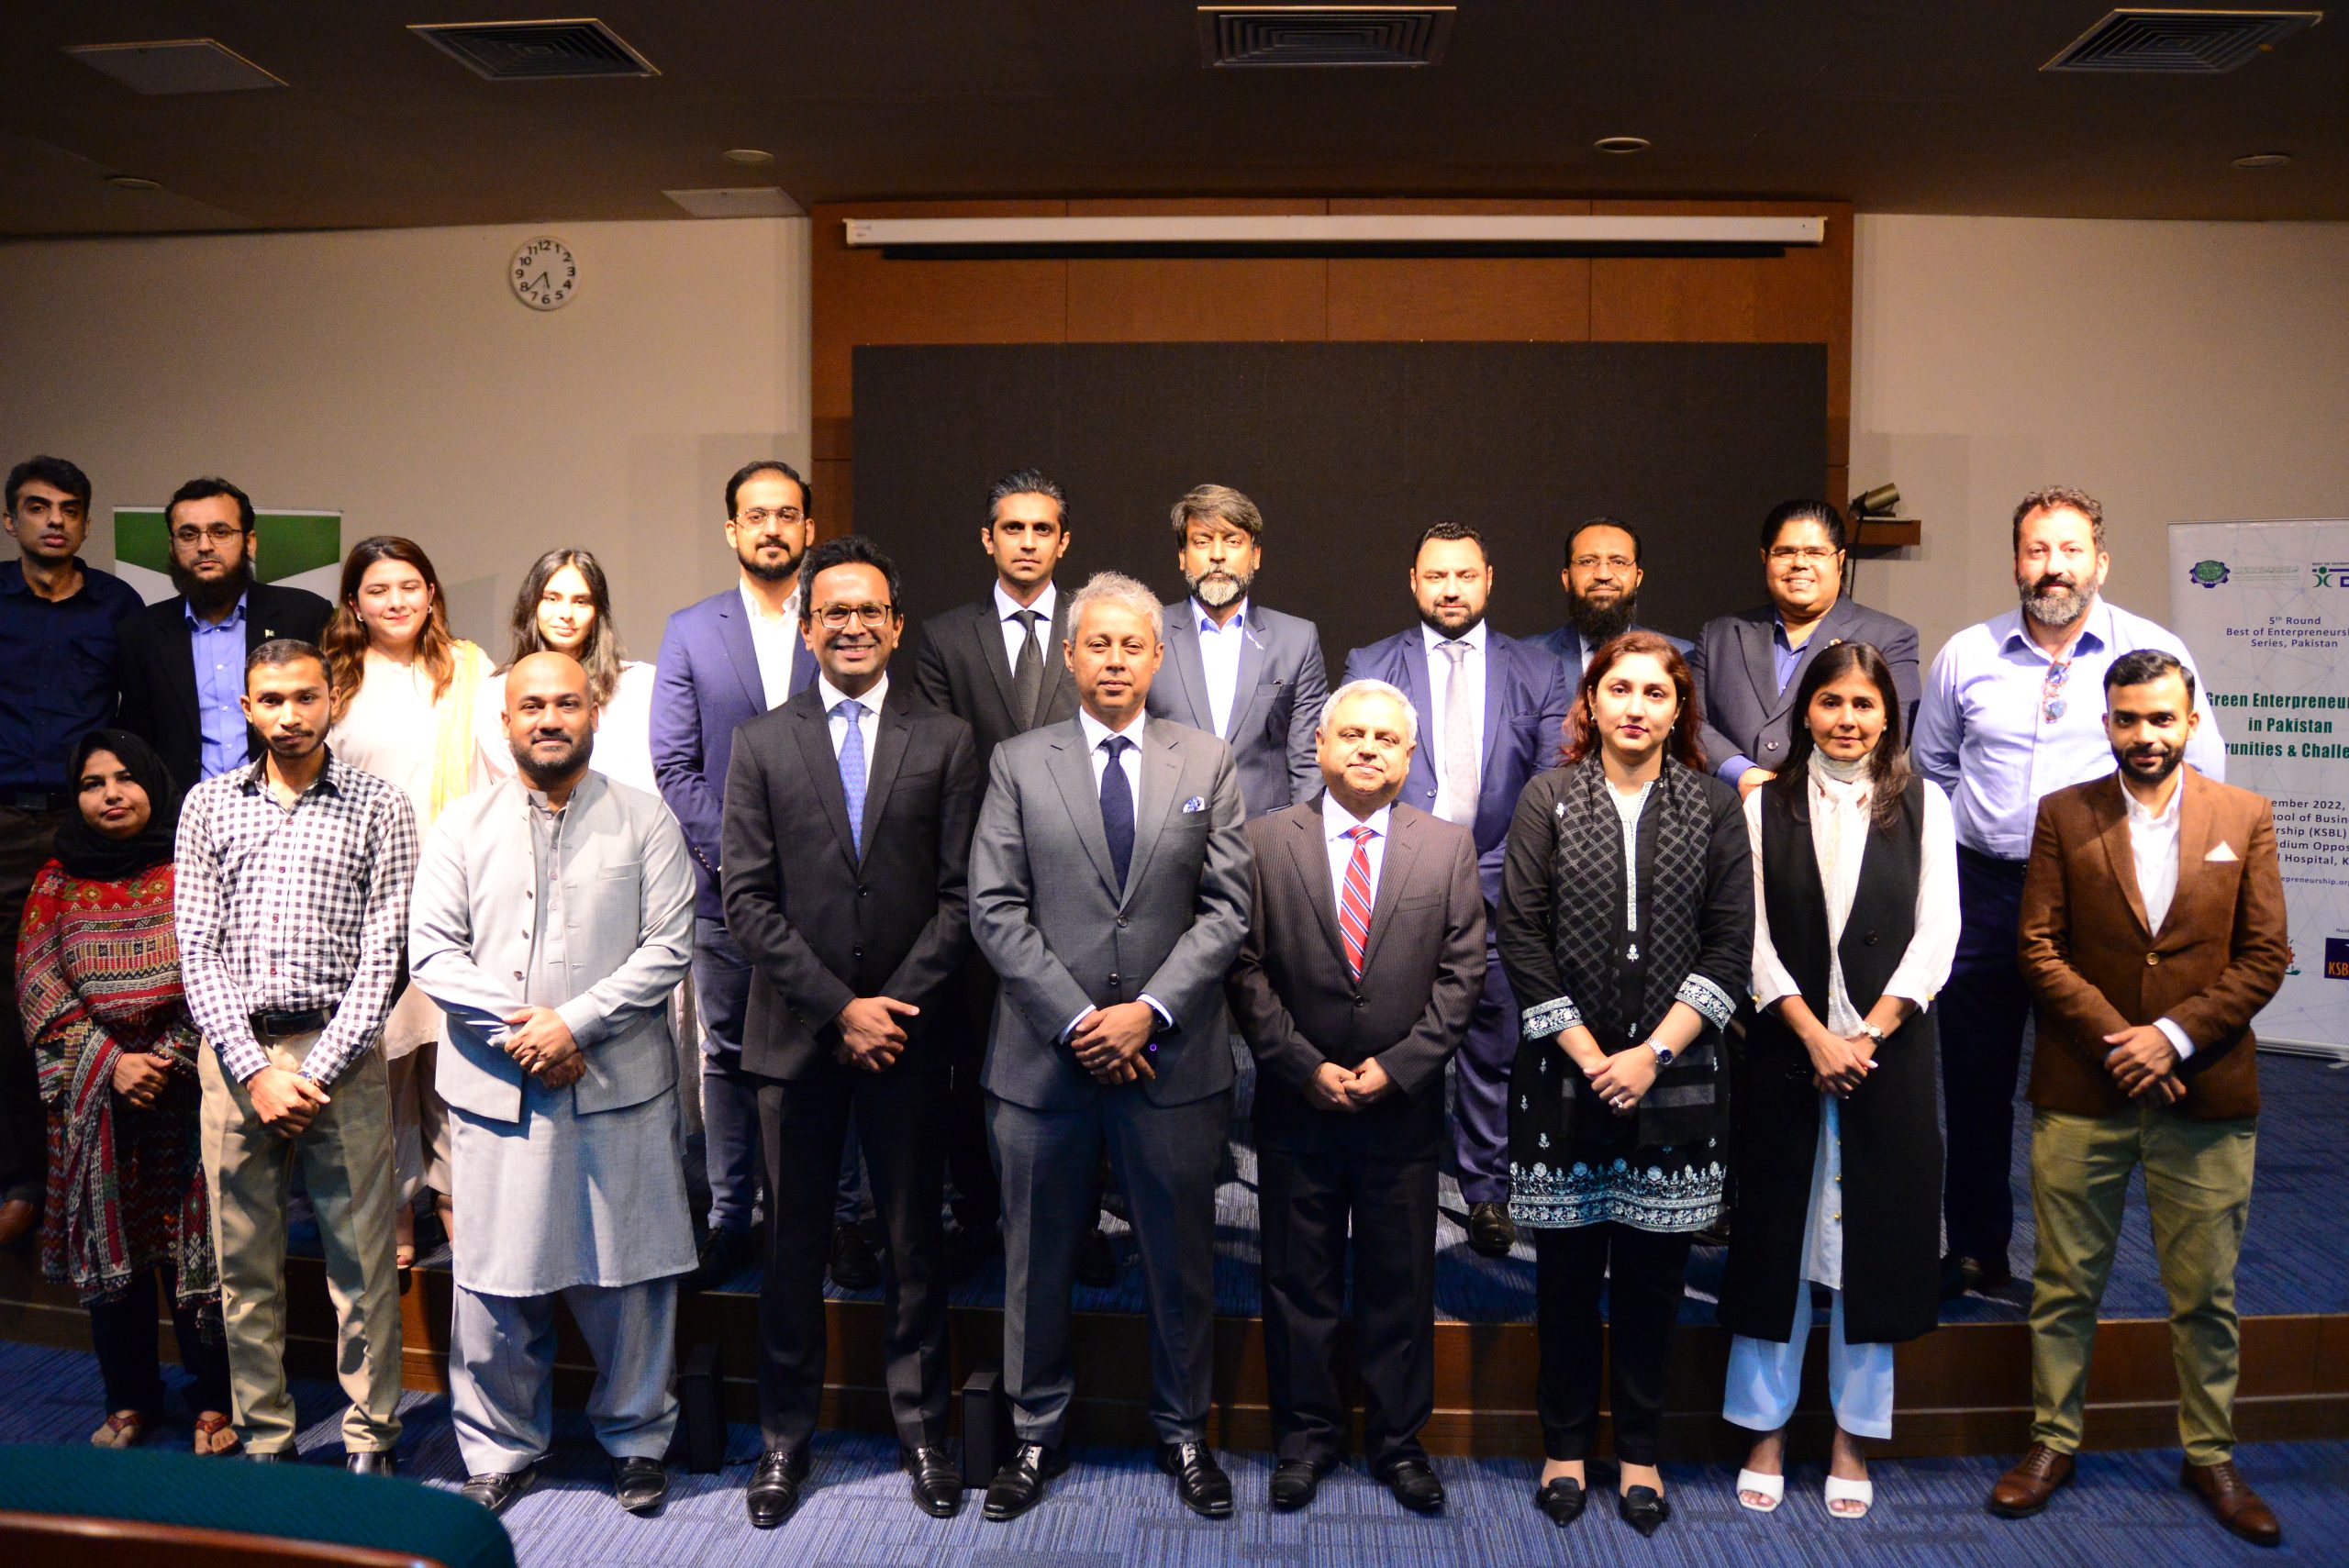 Conference on Green Entrepreneurship in Pakistan – Opportunities and Challenges